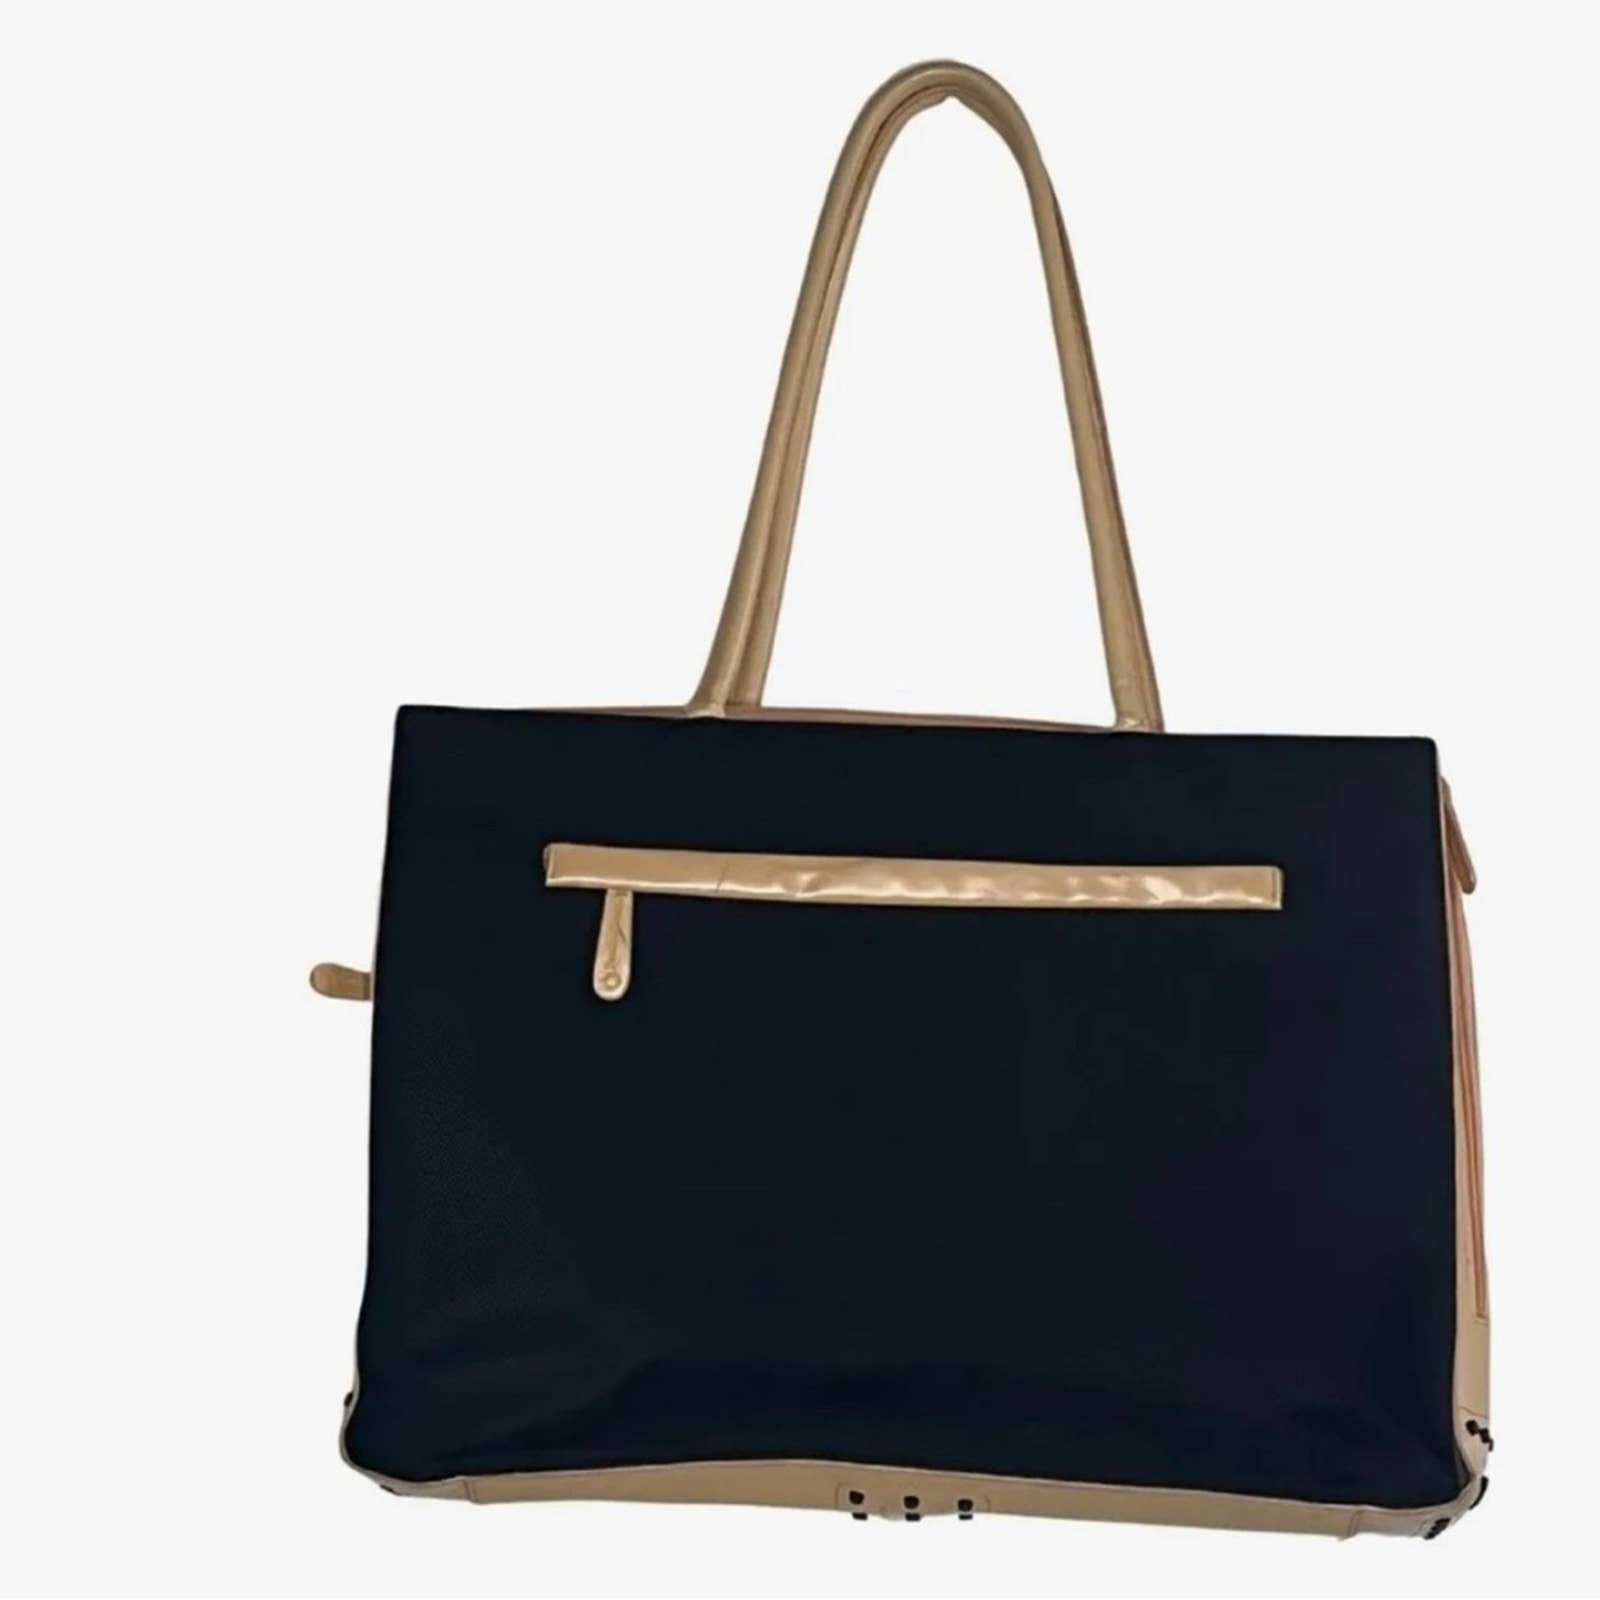 Buy Franklin Covey Bag Online In India -  India